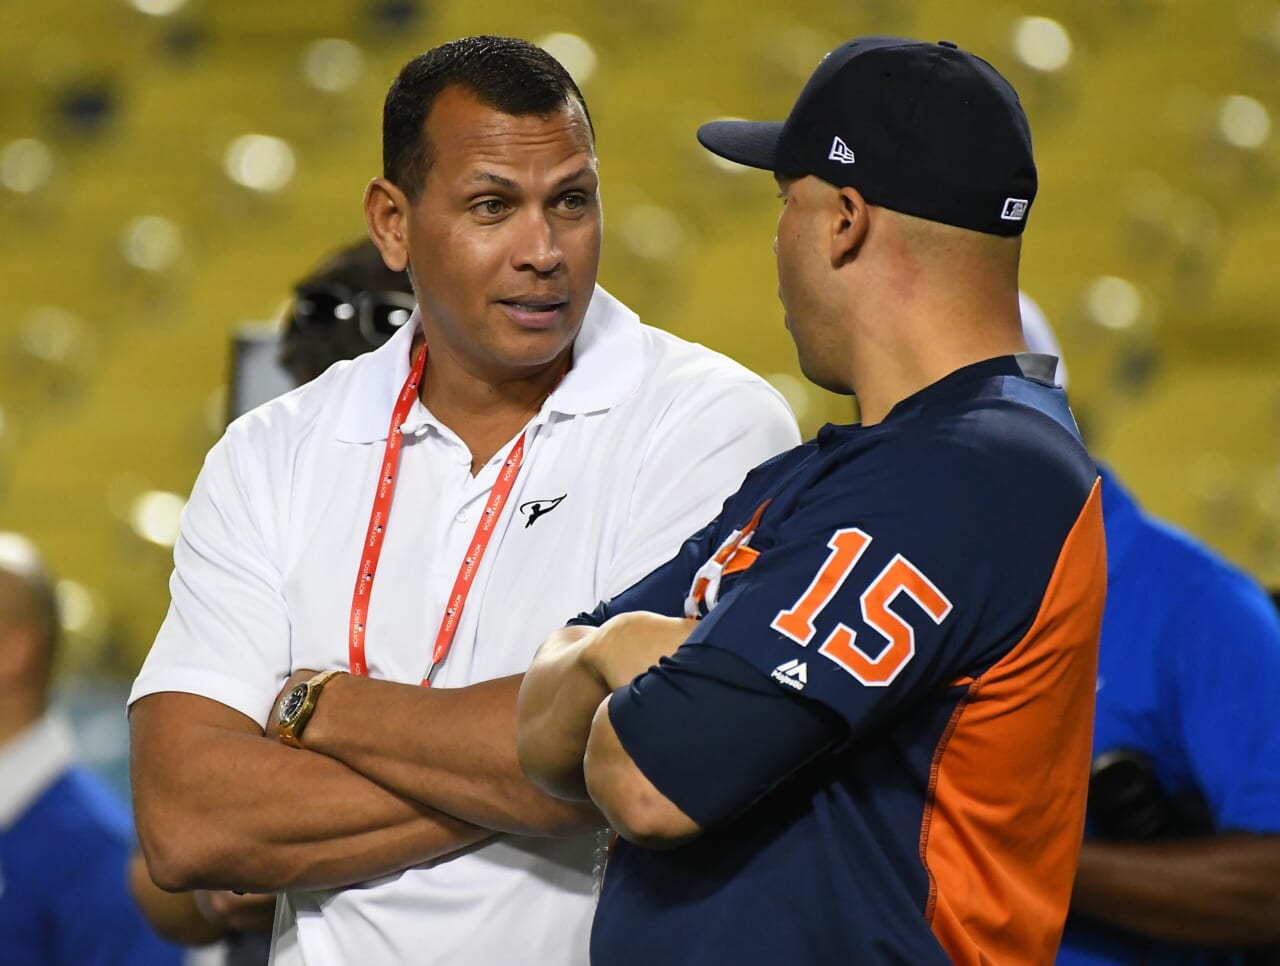 New York Mets: Mike Repole reportedly joins Alex Rodriguez and Jennifer Lopez bid to buy